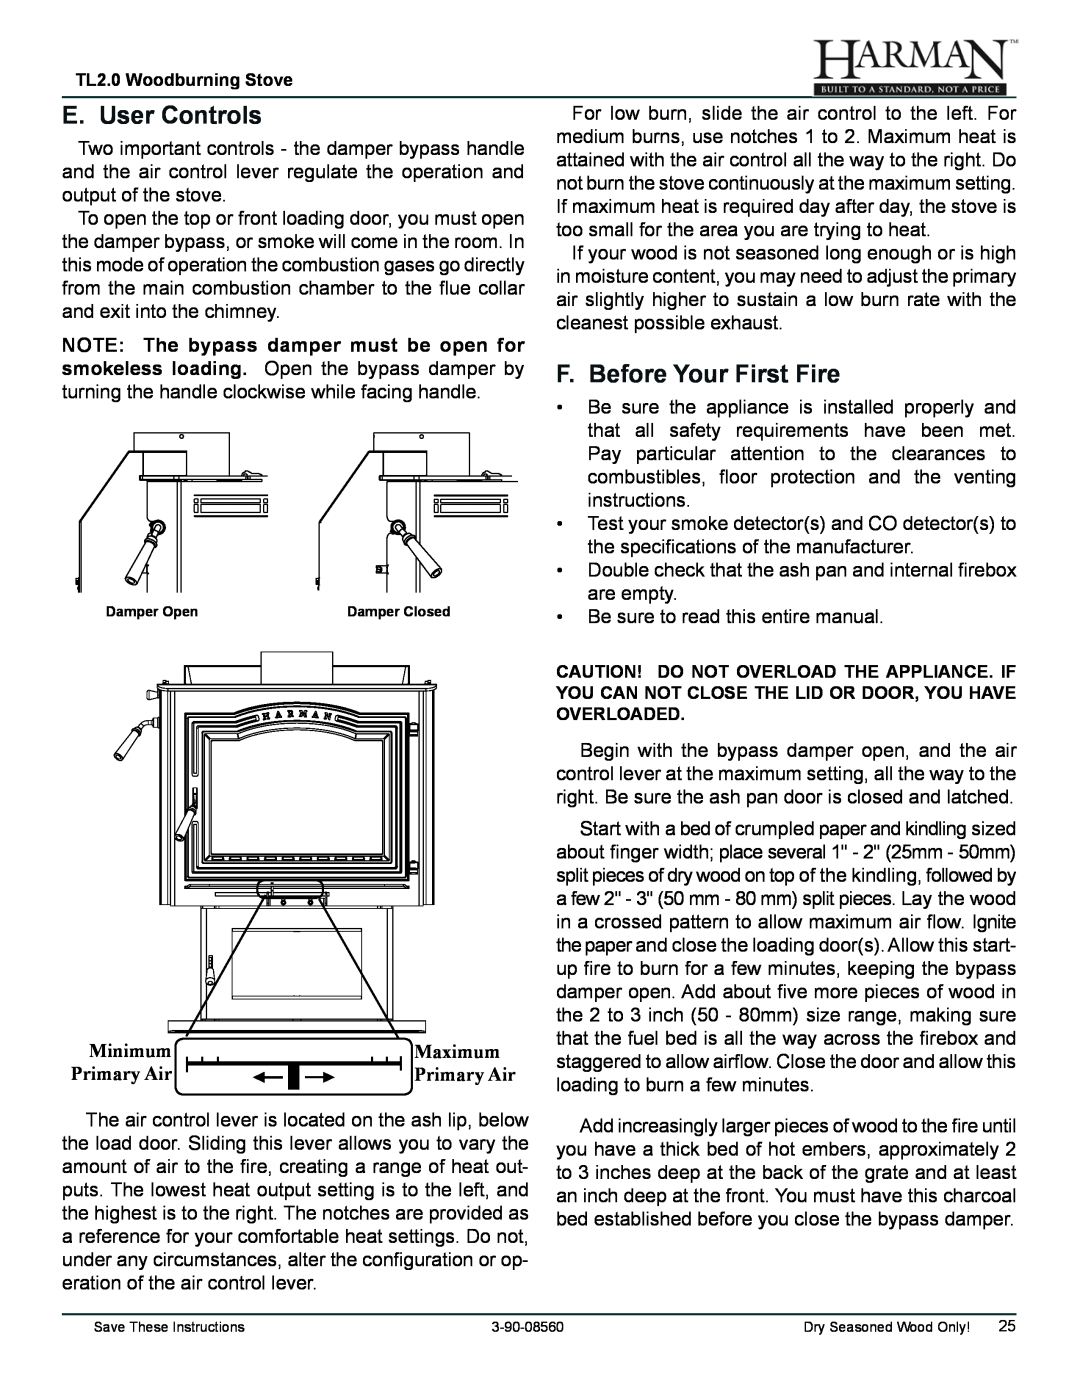 Harman Stove Company TL2.0 manual E. User Controls, F. Before Your First Fire, Minimum, Maximum, Primary Air 